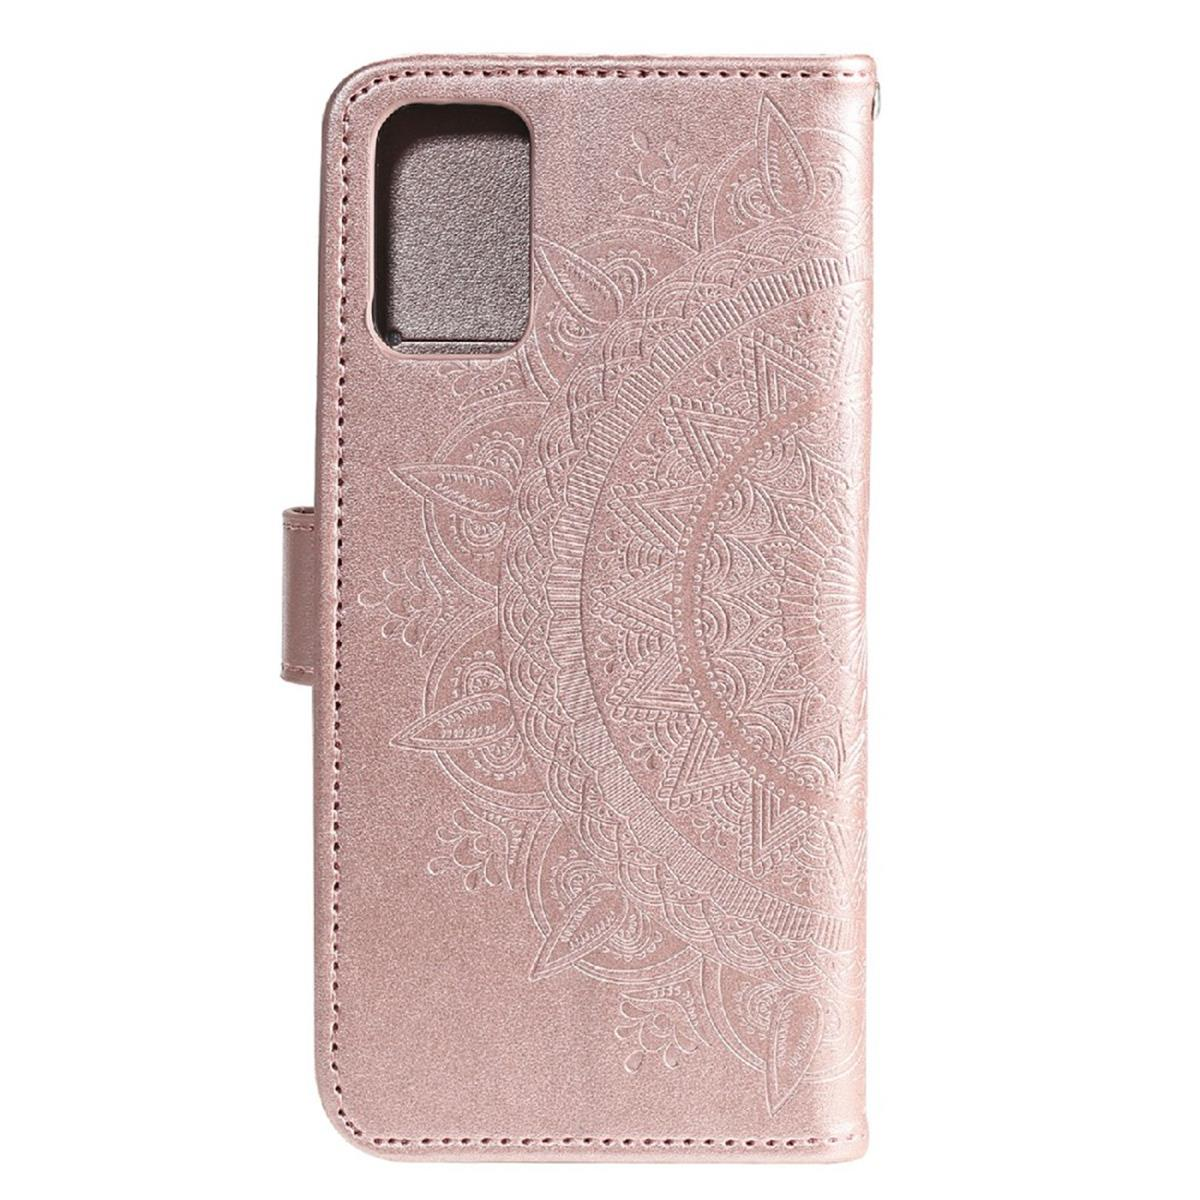 COVERKINGZ Klapphülle Mandala Bookcover, A03s, Rosegold Muster, Samsung, Galaxy mit